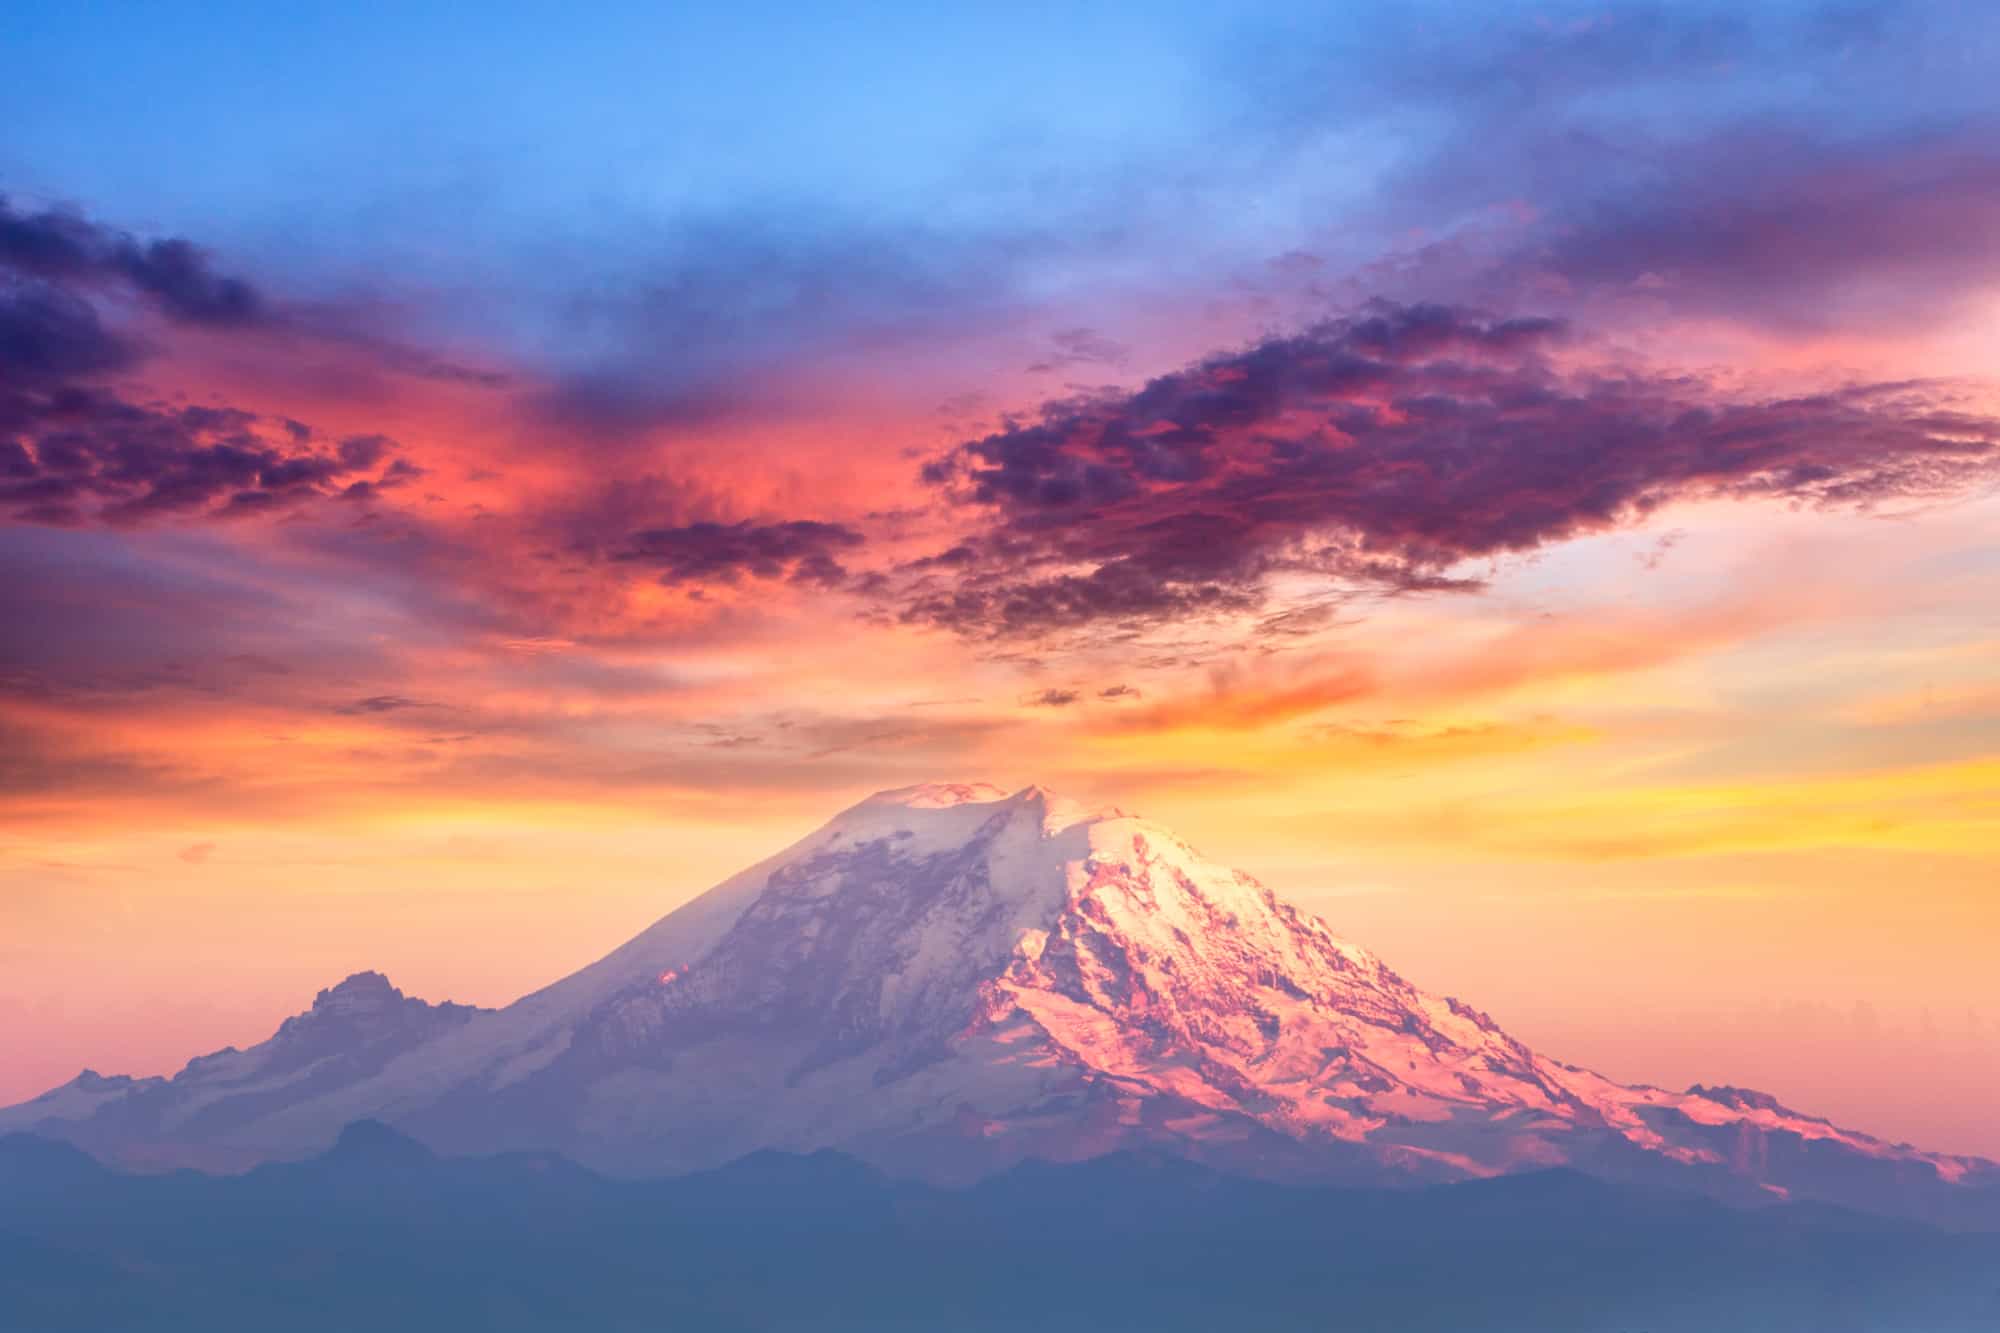 the top of mount rainier at sunset, with oranges, pinks and purples glowing above the snow covered peak